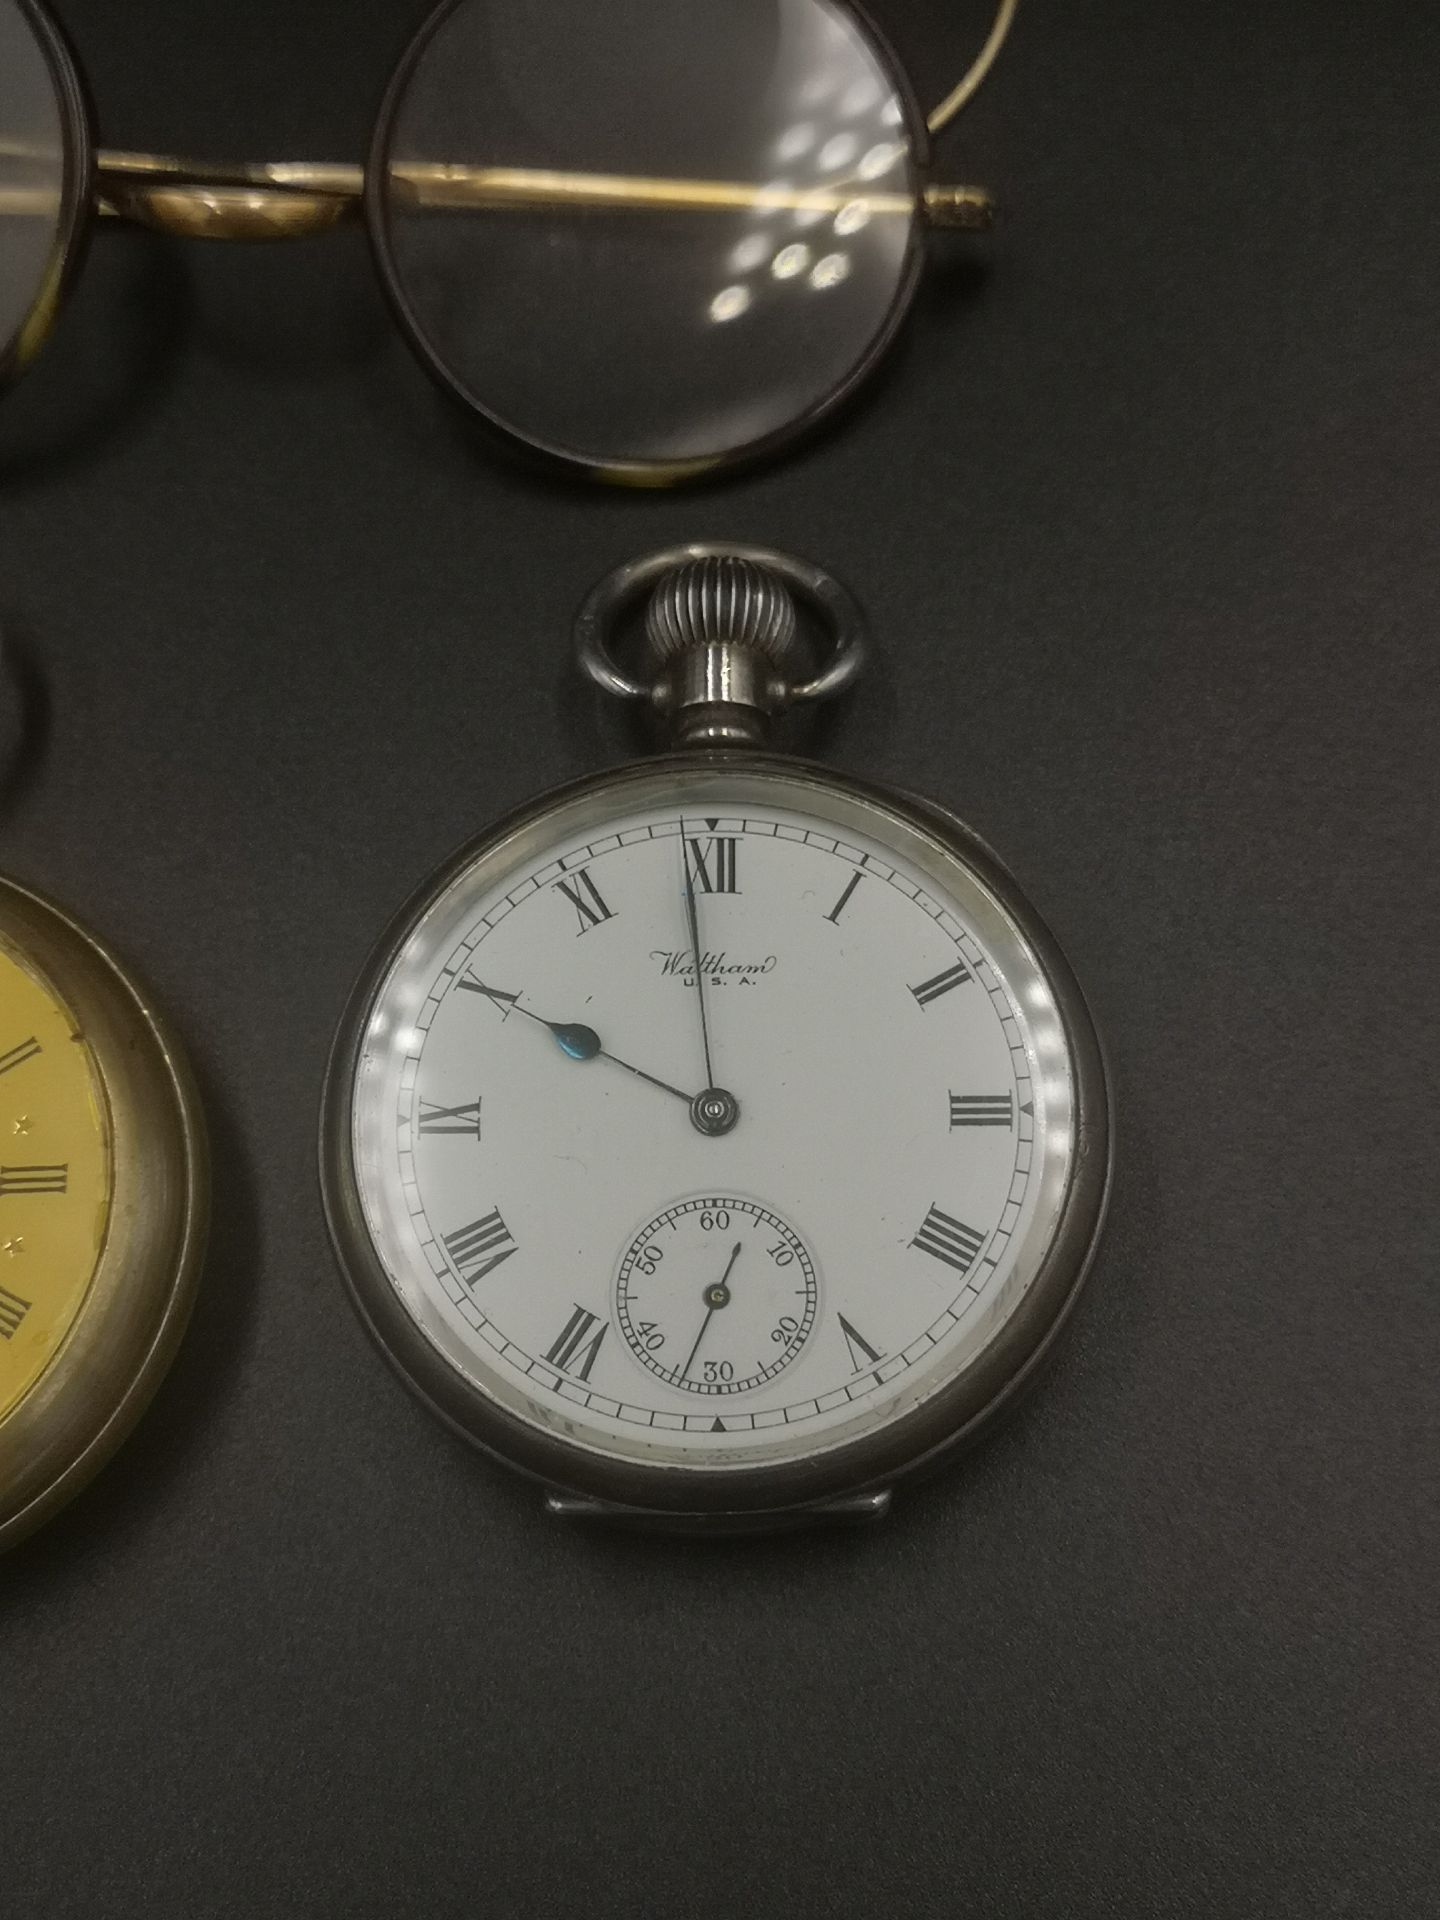 Waltham silver cased pocket watch; a pocket watch; rolled gold pair of spectacles - Image 3 of 7